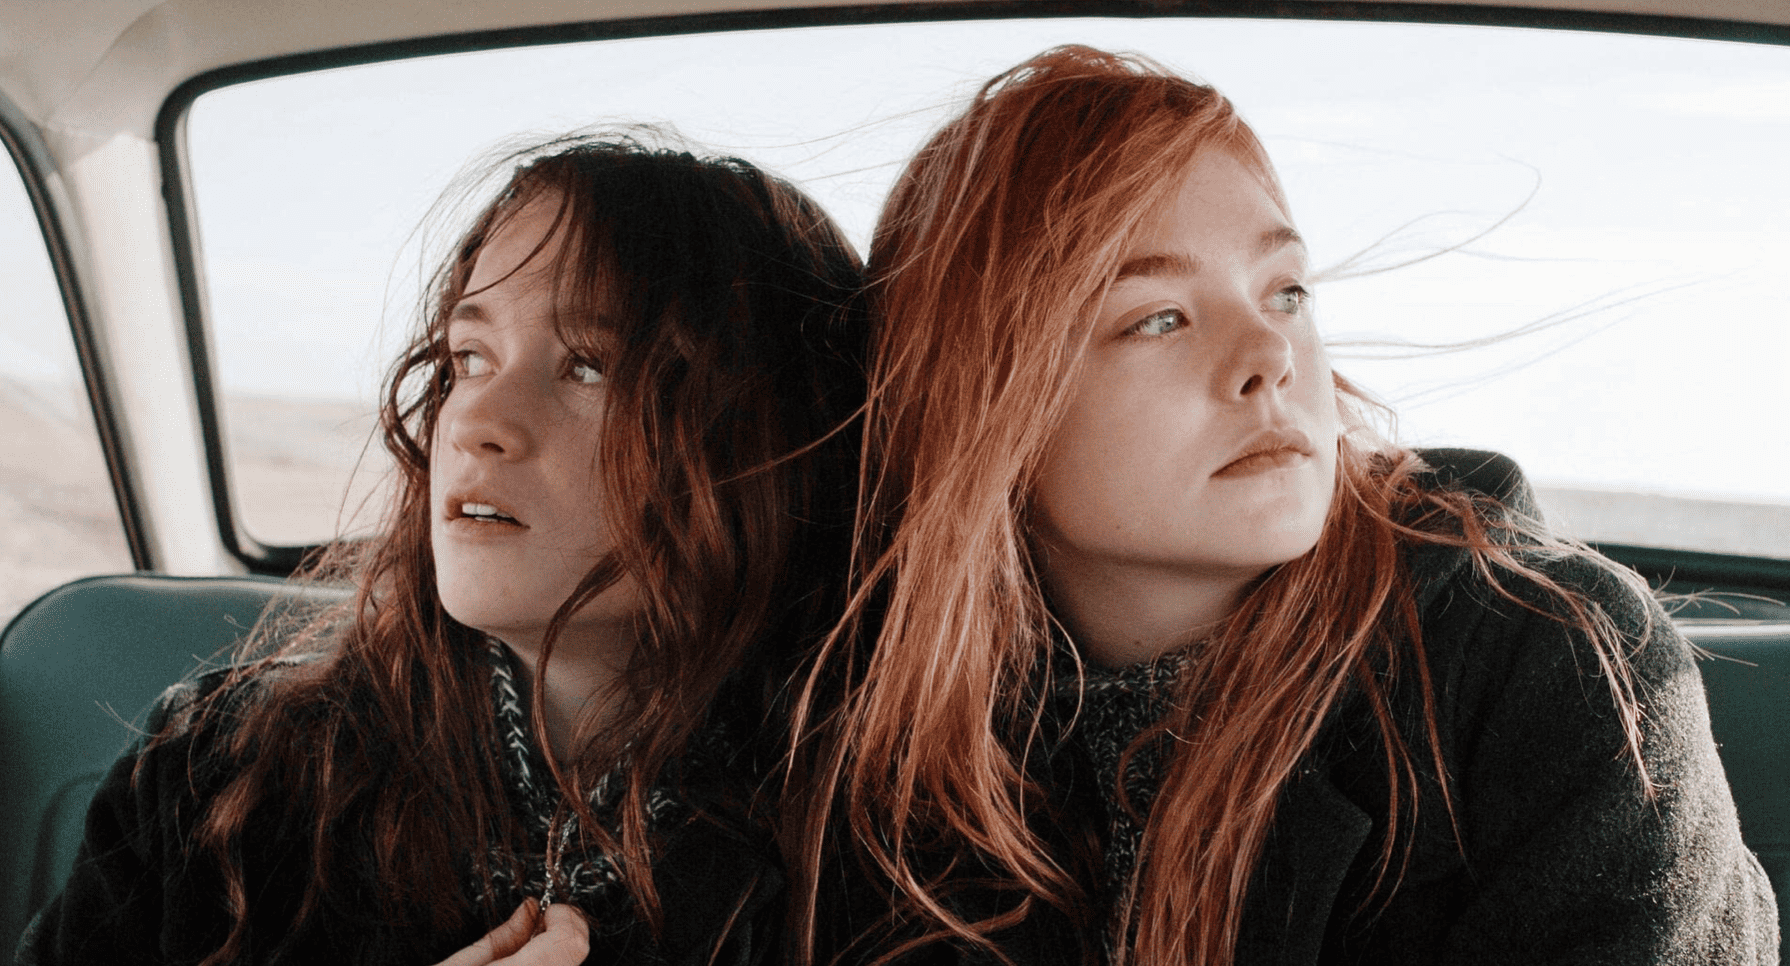 Rosa (Alice Englert) and Ginger (Elle Fanning) embrace each other in the backseat of a car in this image from British Film Institute